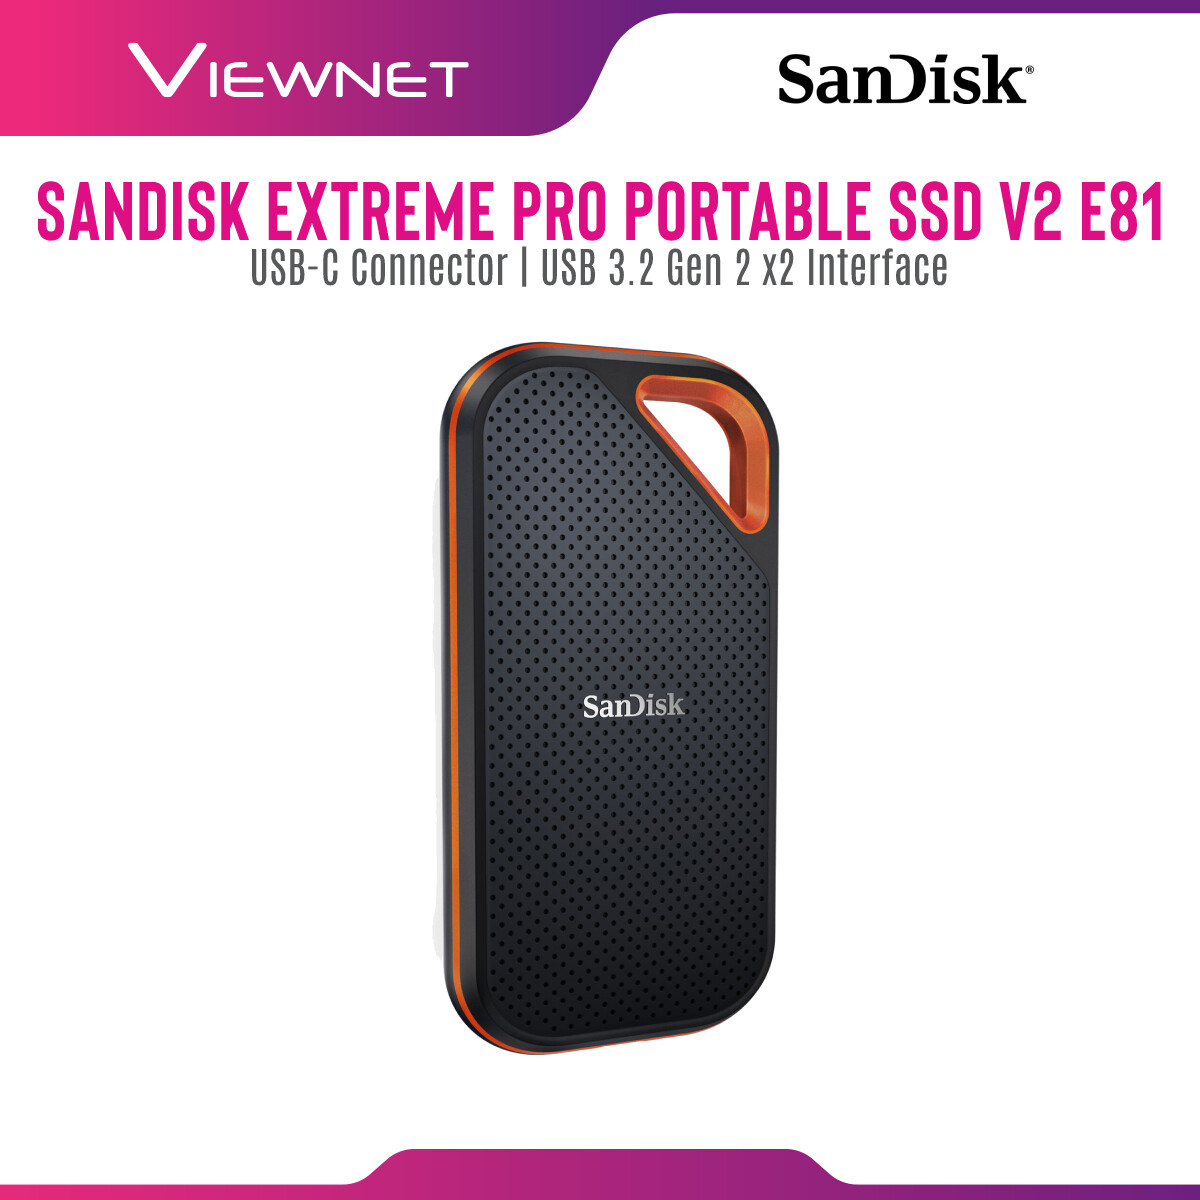 SanDisk Extreme PRO Portable SSD V2, 1TB 2TB 2000MB/s E81 USB 3.1 for Windows & Mac Type-C Type-A IP55 Dust and Water-Resistant